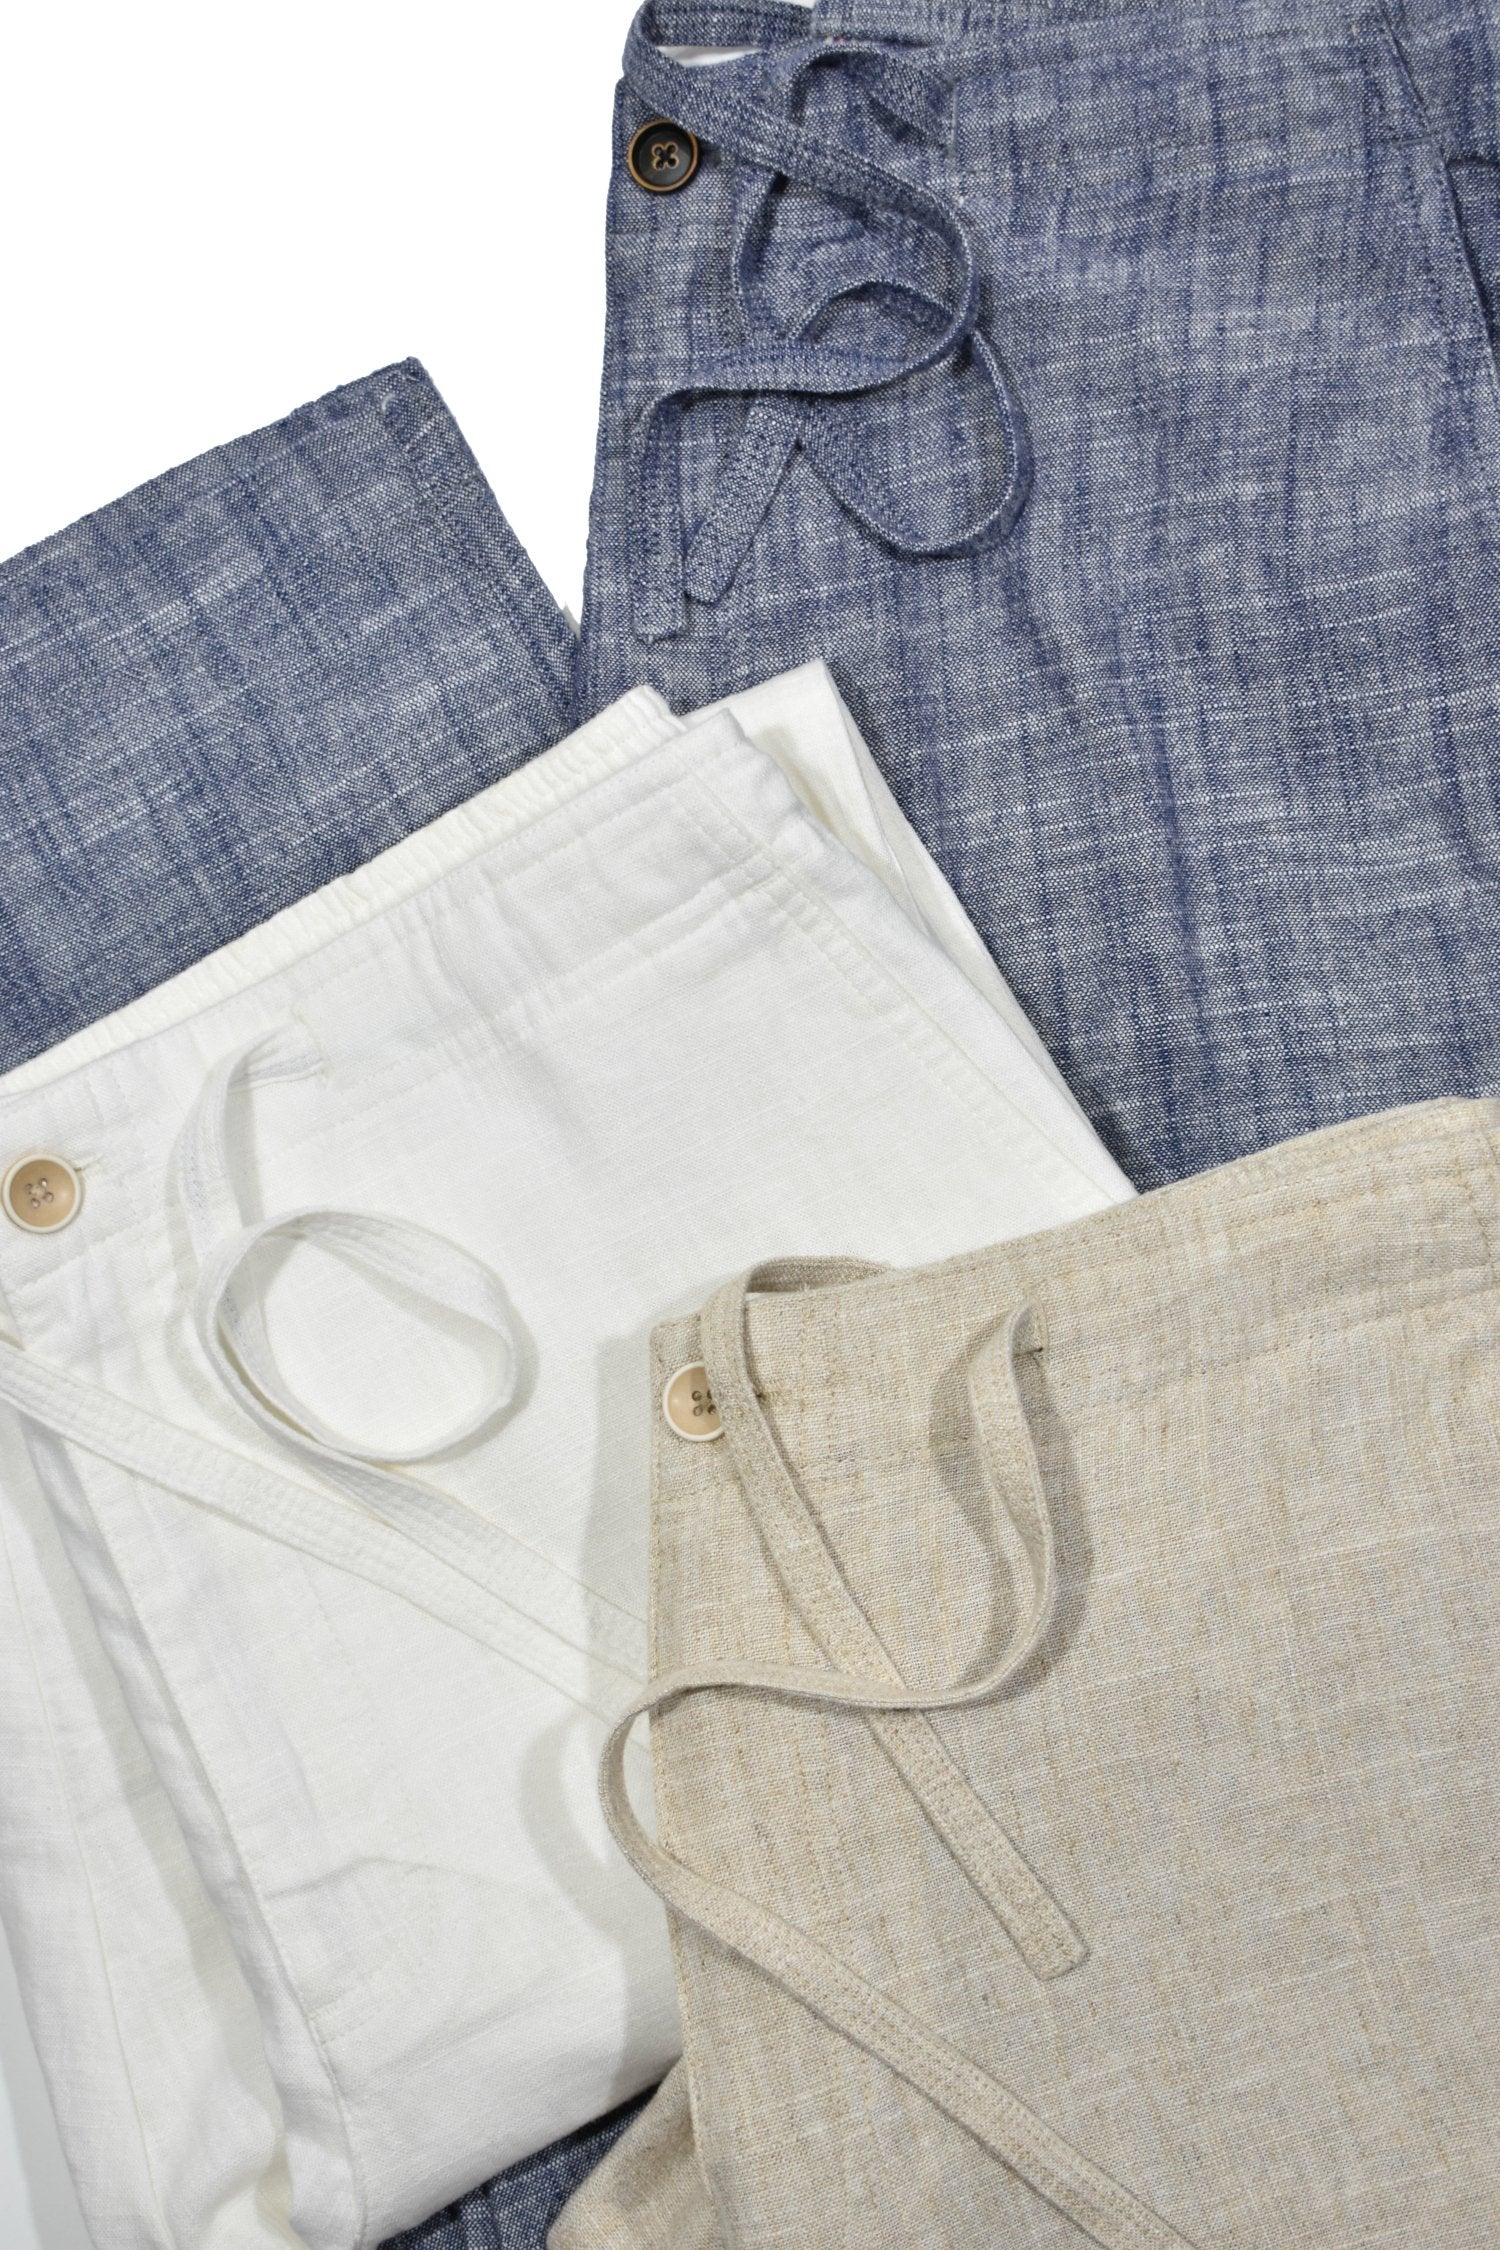 Soft washed 60% pure linen and 40% viscose feels great to the touch and has the characteristic look of linen without the negative attributes.  Draw string comfort waist with built in half stretch along the back, side slash pockets and two rear button through pockets.